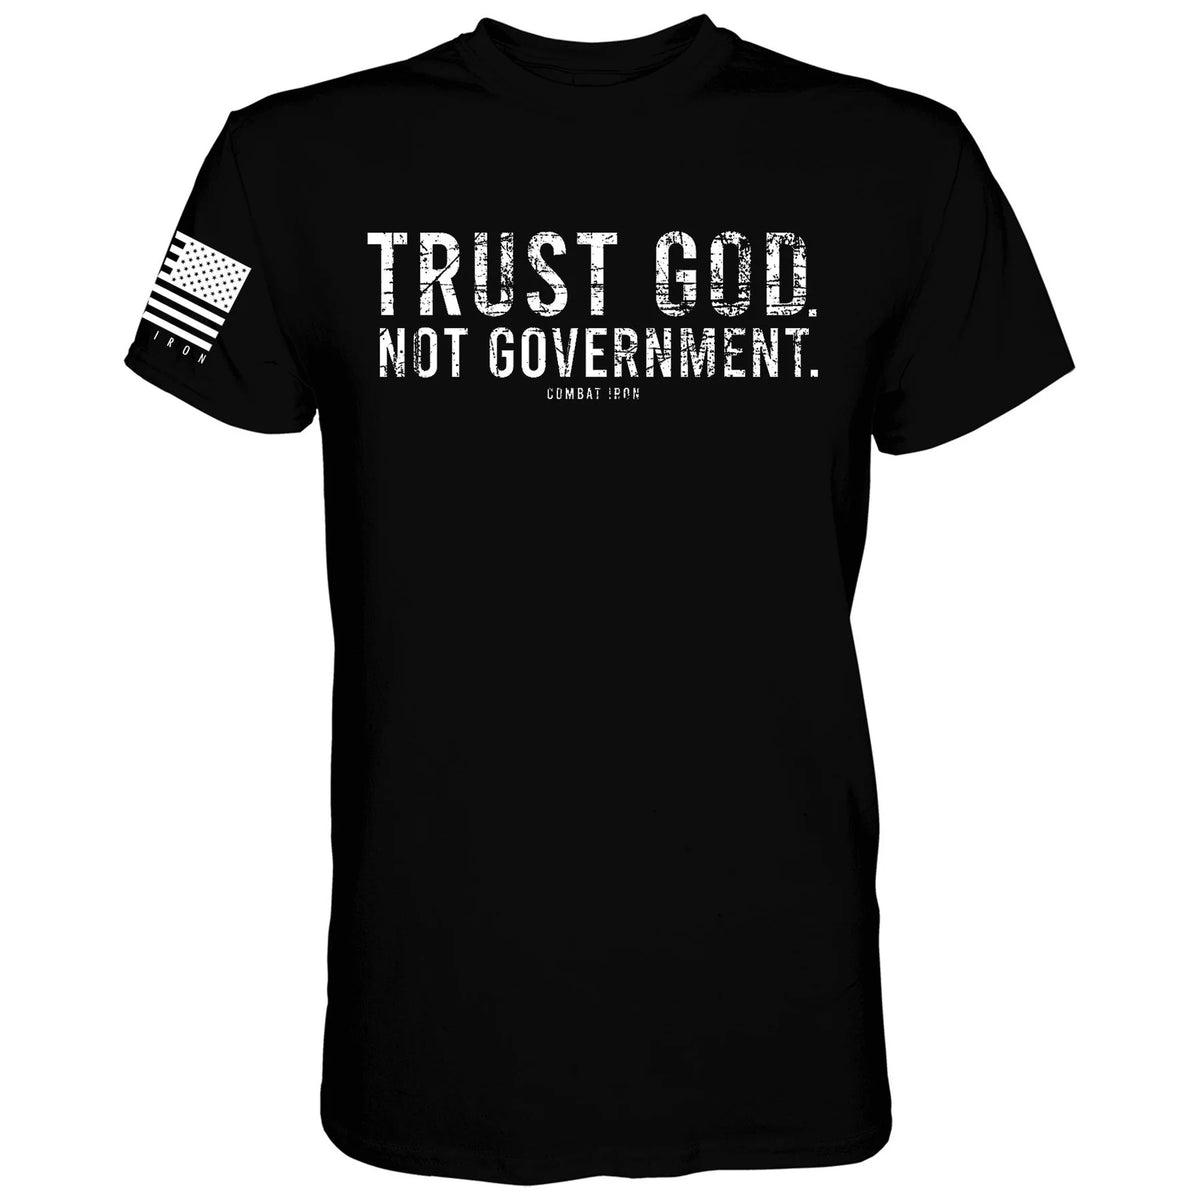 Trust God. Not Government